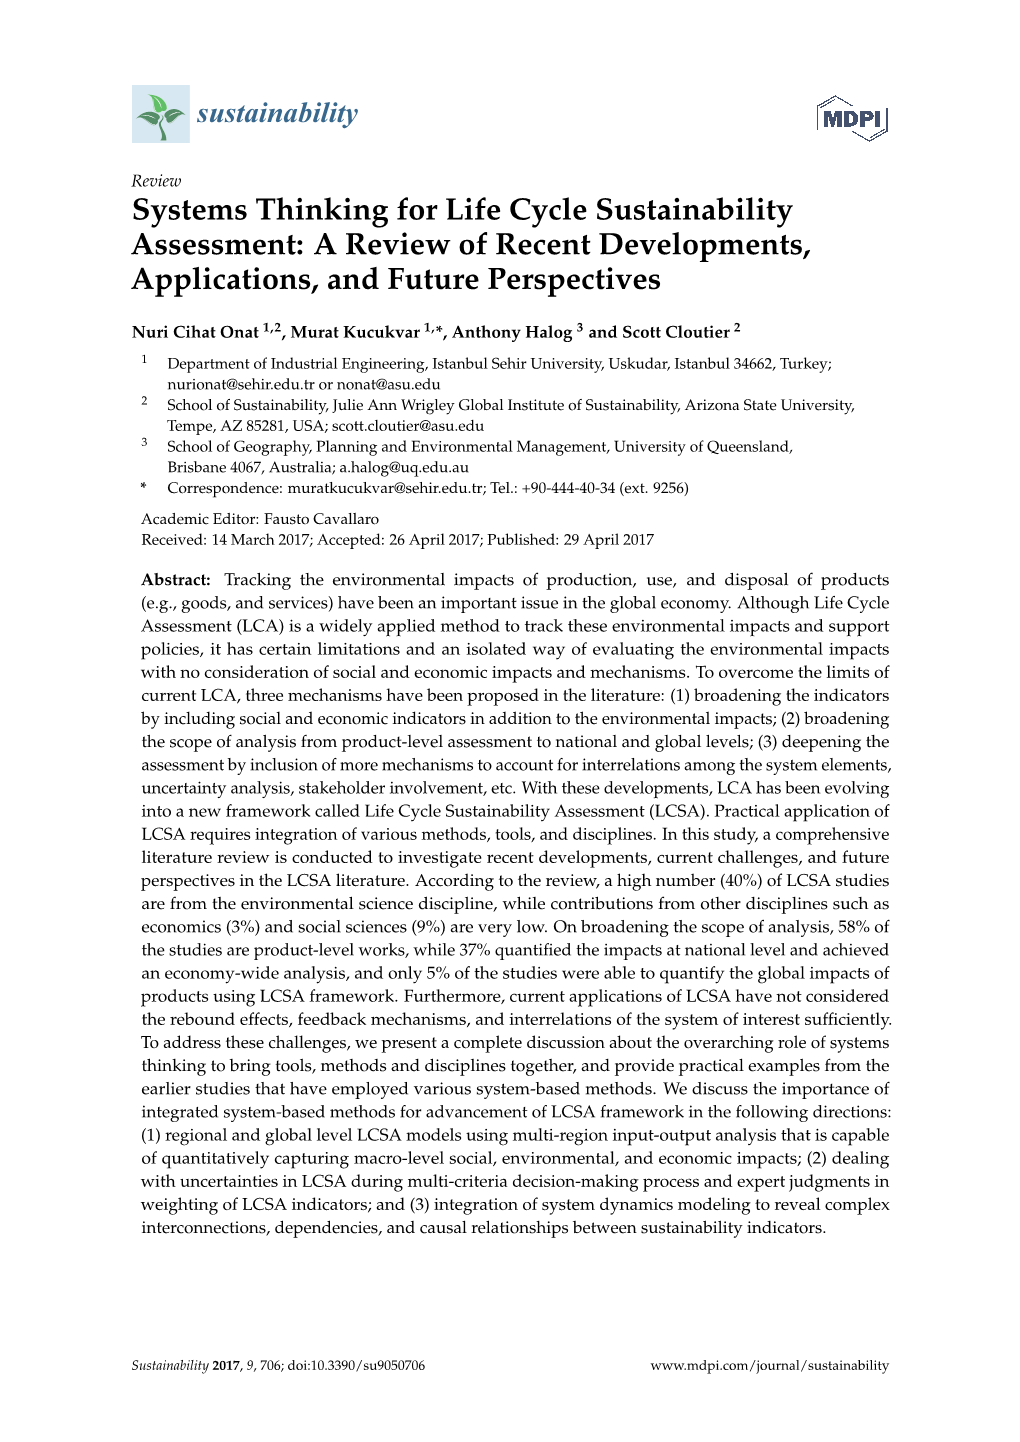 Systems Thinking for Life Cycle Sustainability Assessment: a Review of Recent Developments, Applications, and Future Perspectives